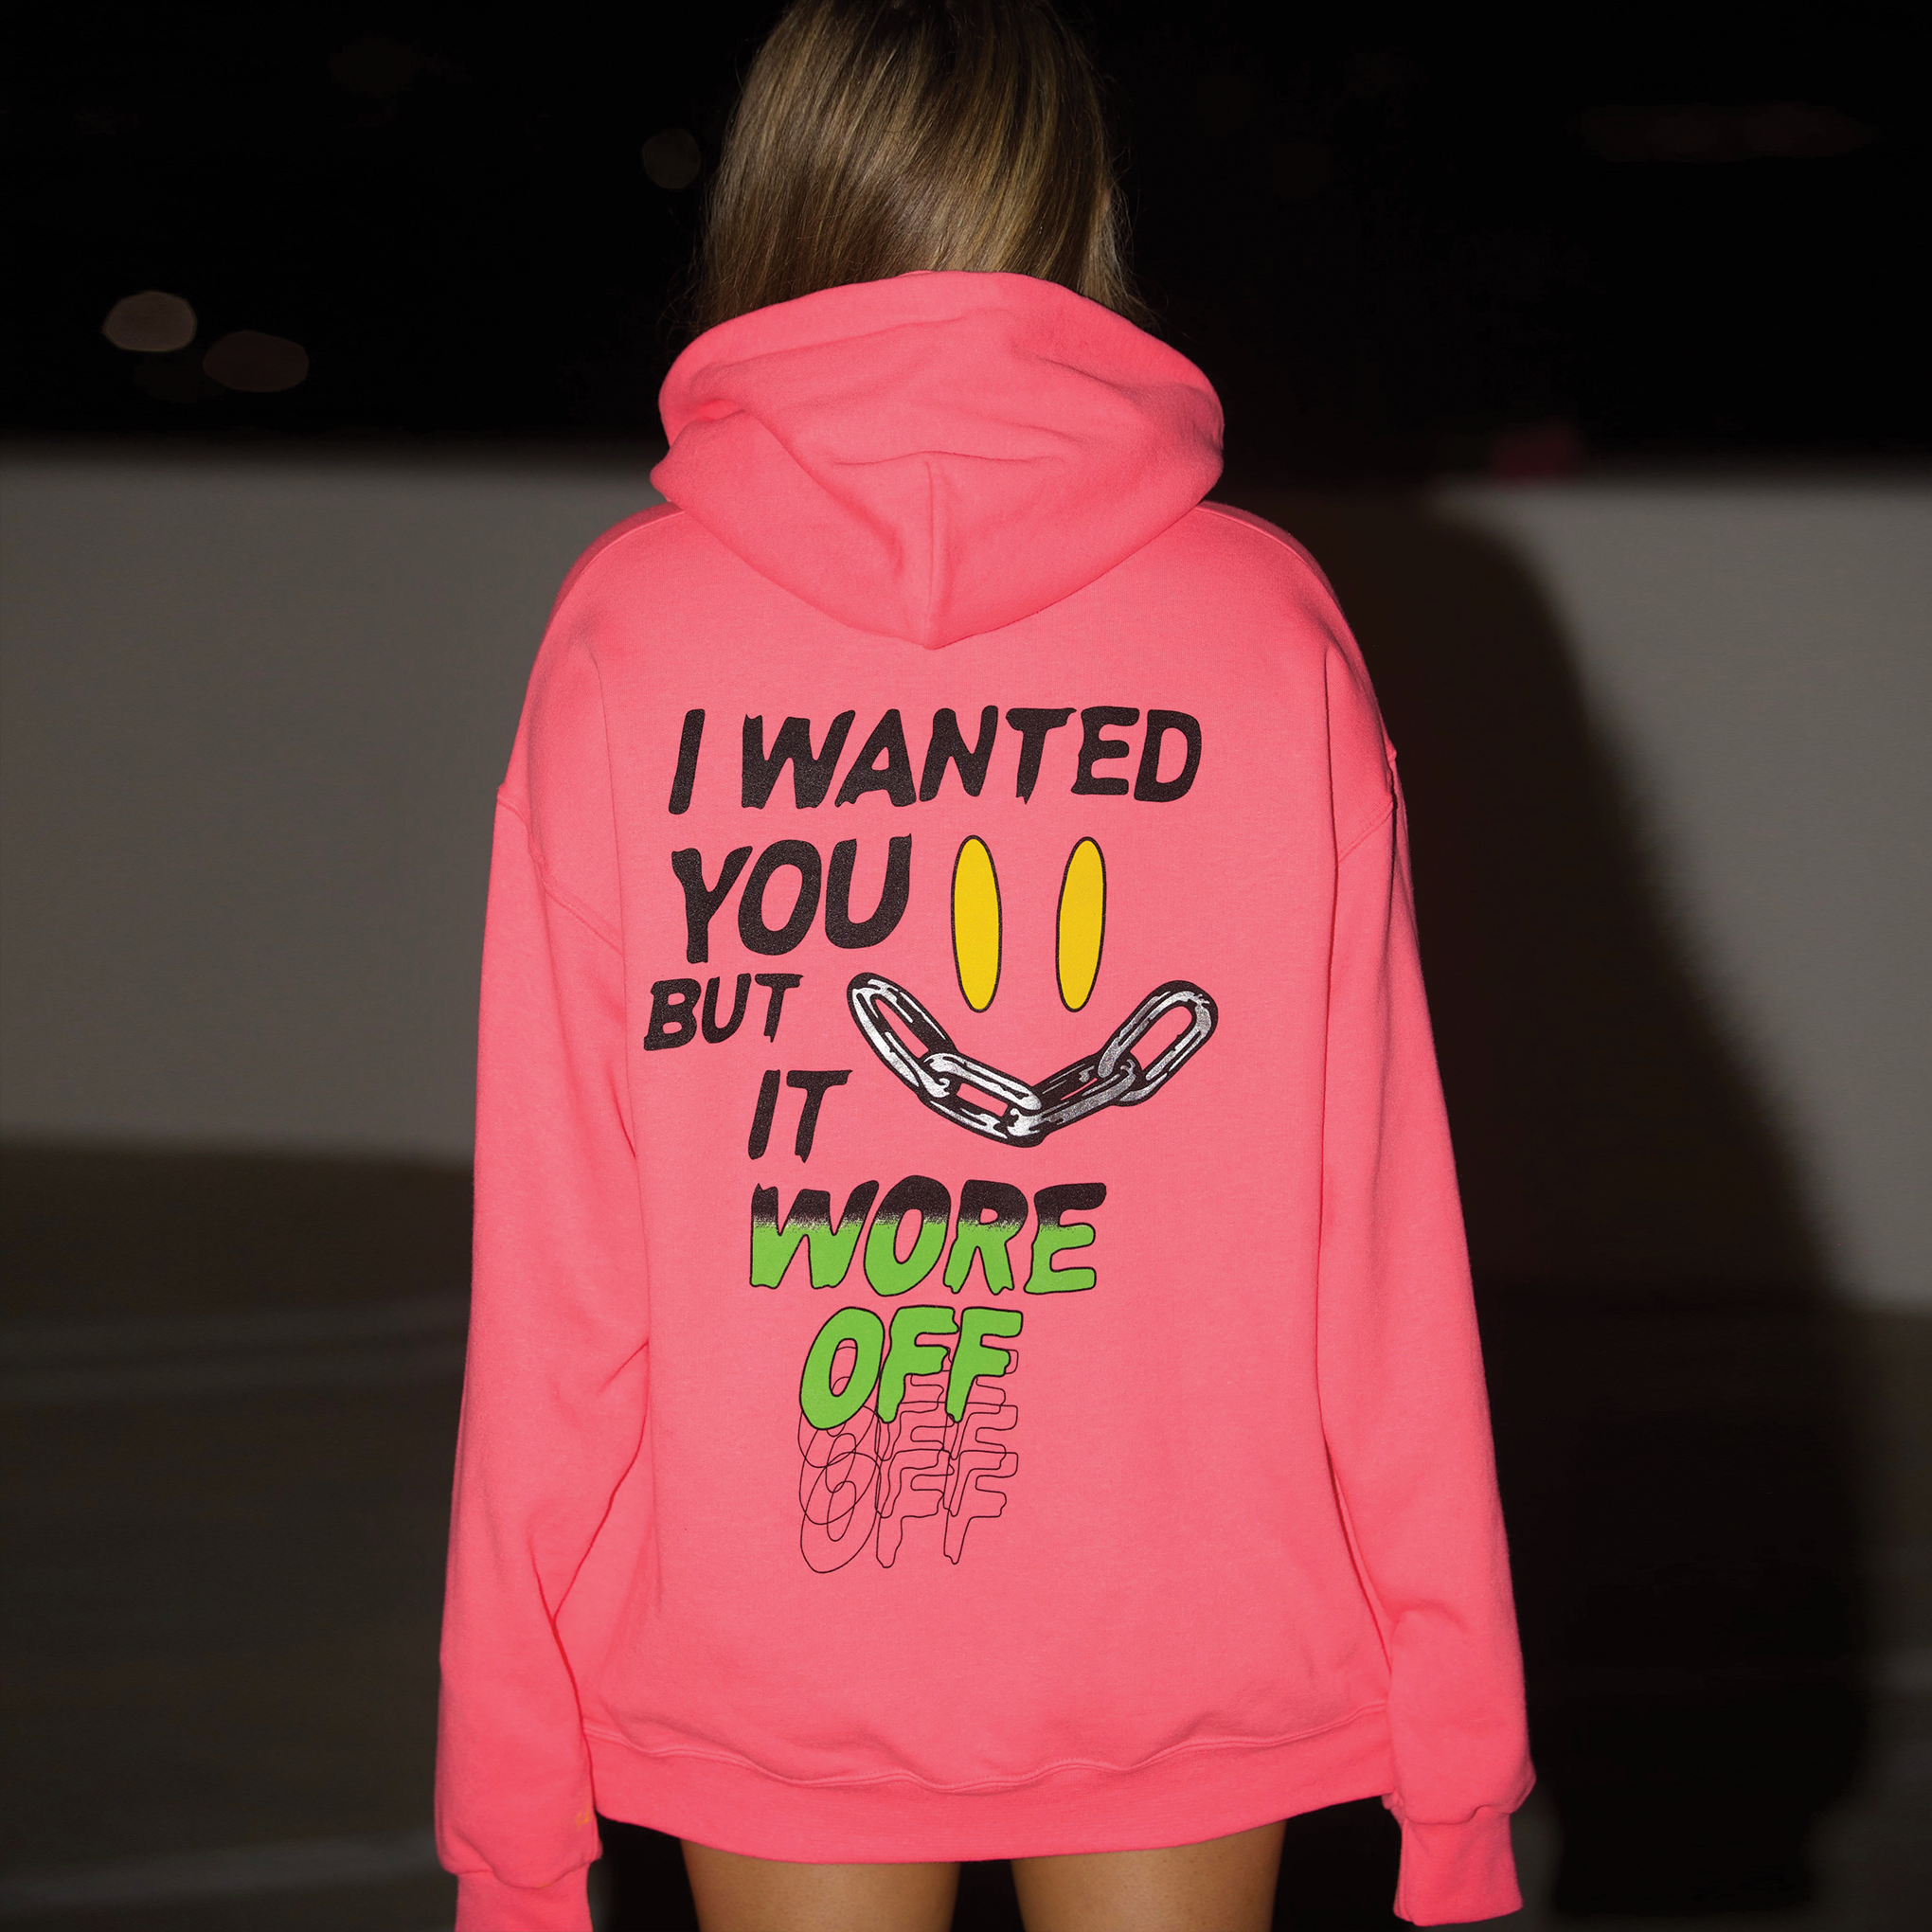 WANTED YOU HOODIE